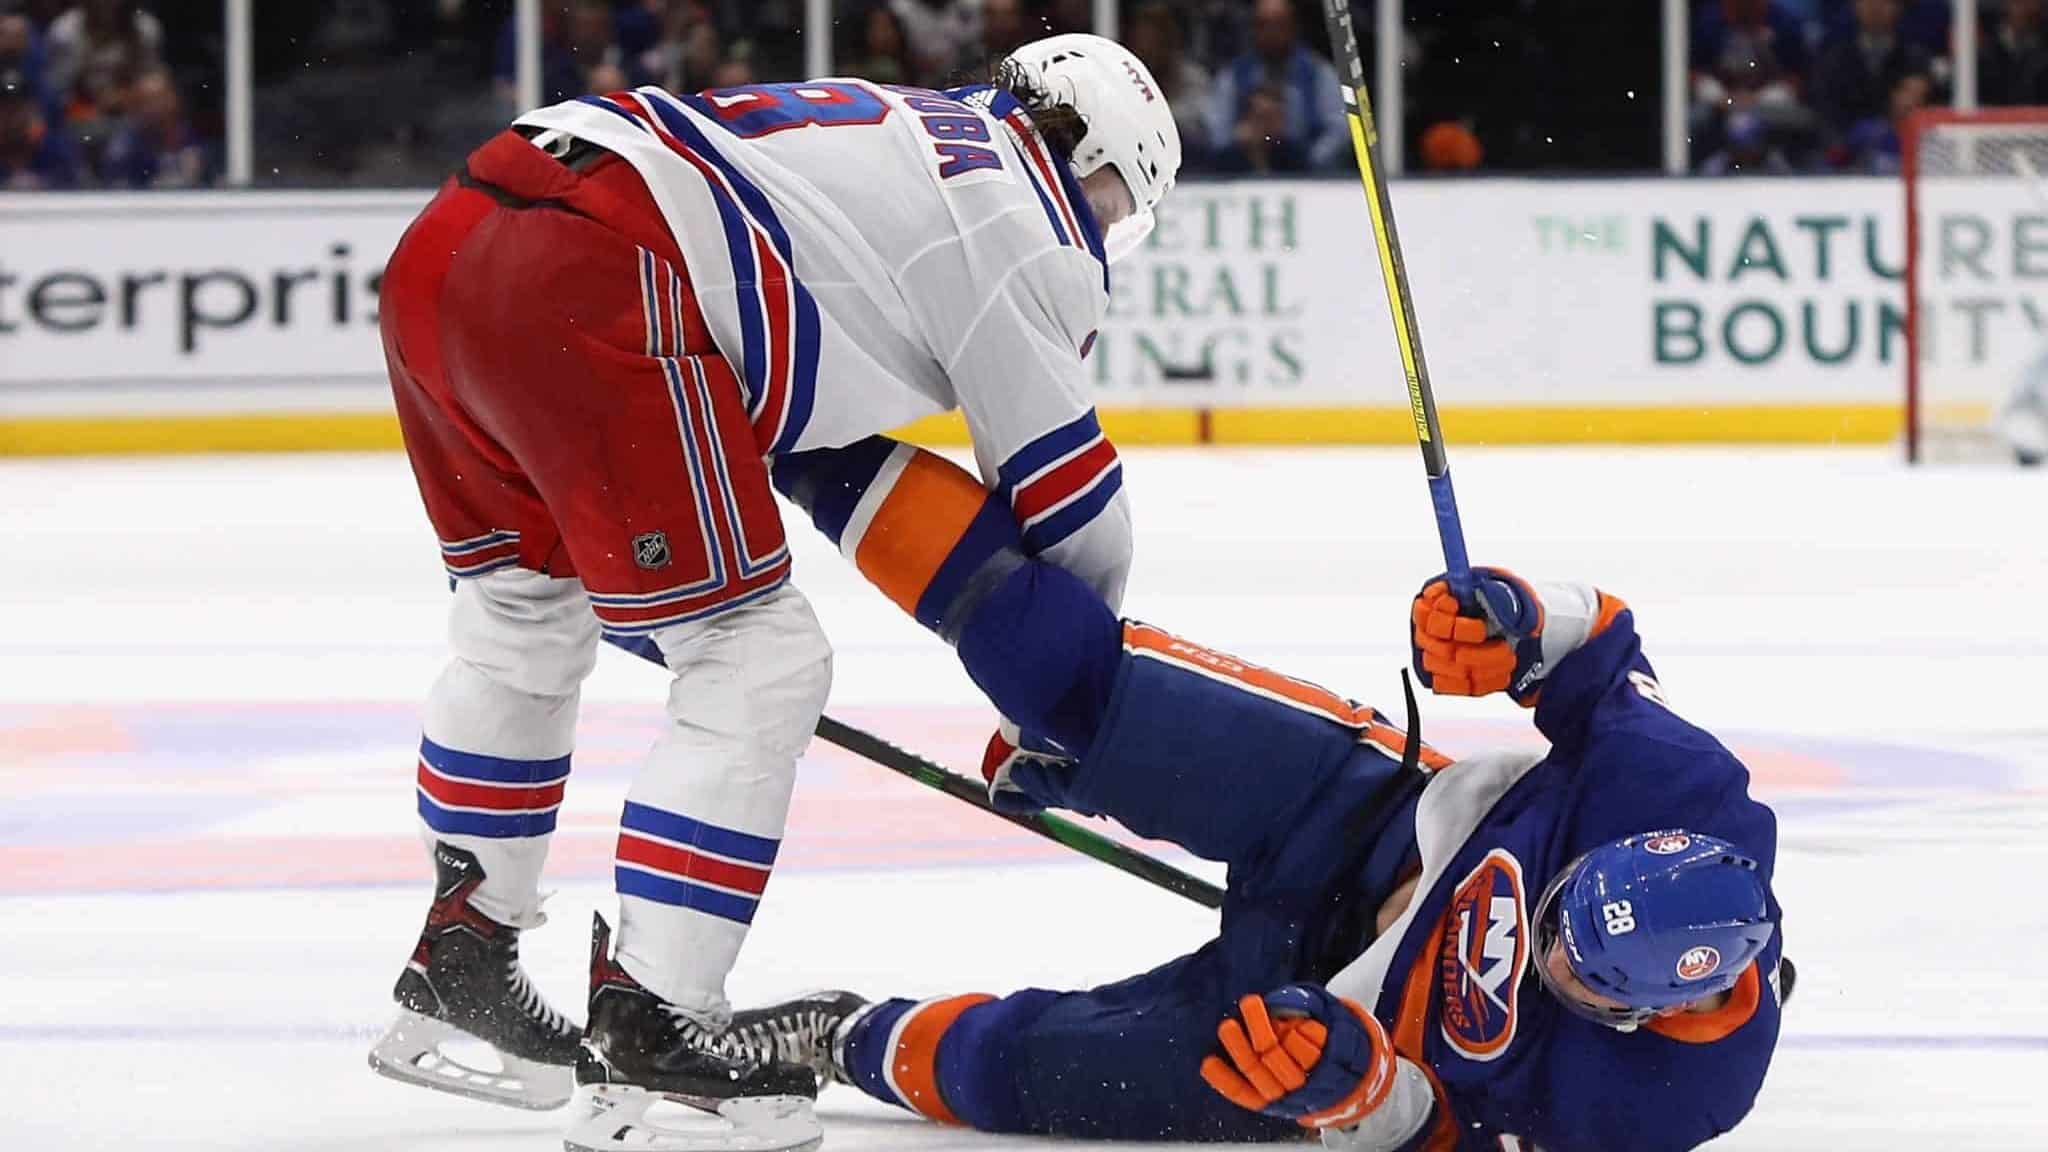 NEW YORK, NEW YORK - FEBRUARY 25: Jacob Trouba #8 of the New York Rangers checks Michael Dal Colle #28 of the New York Islanders during the third period at NYCB Live's Nassau Coliseum on February 25, 2020 in Uniondale, New York. The Rangers defeated the Islanders 4-3 in overtime.